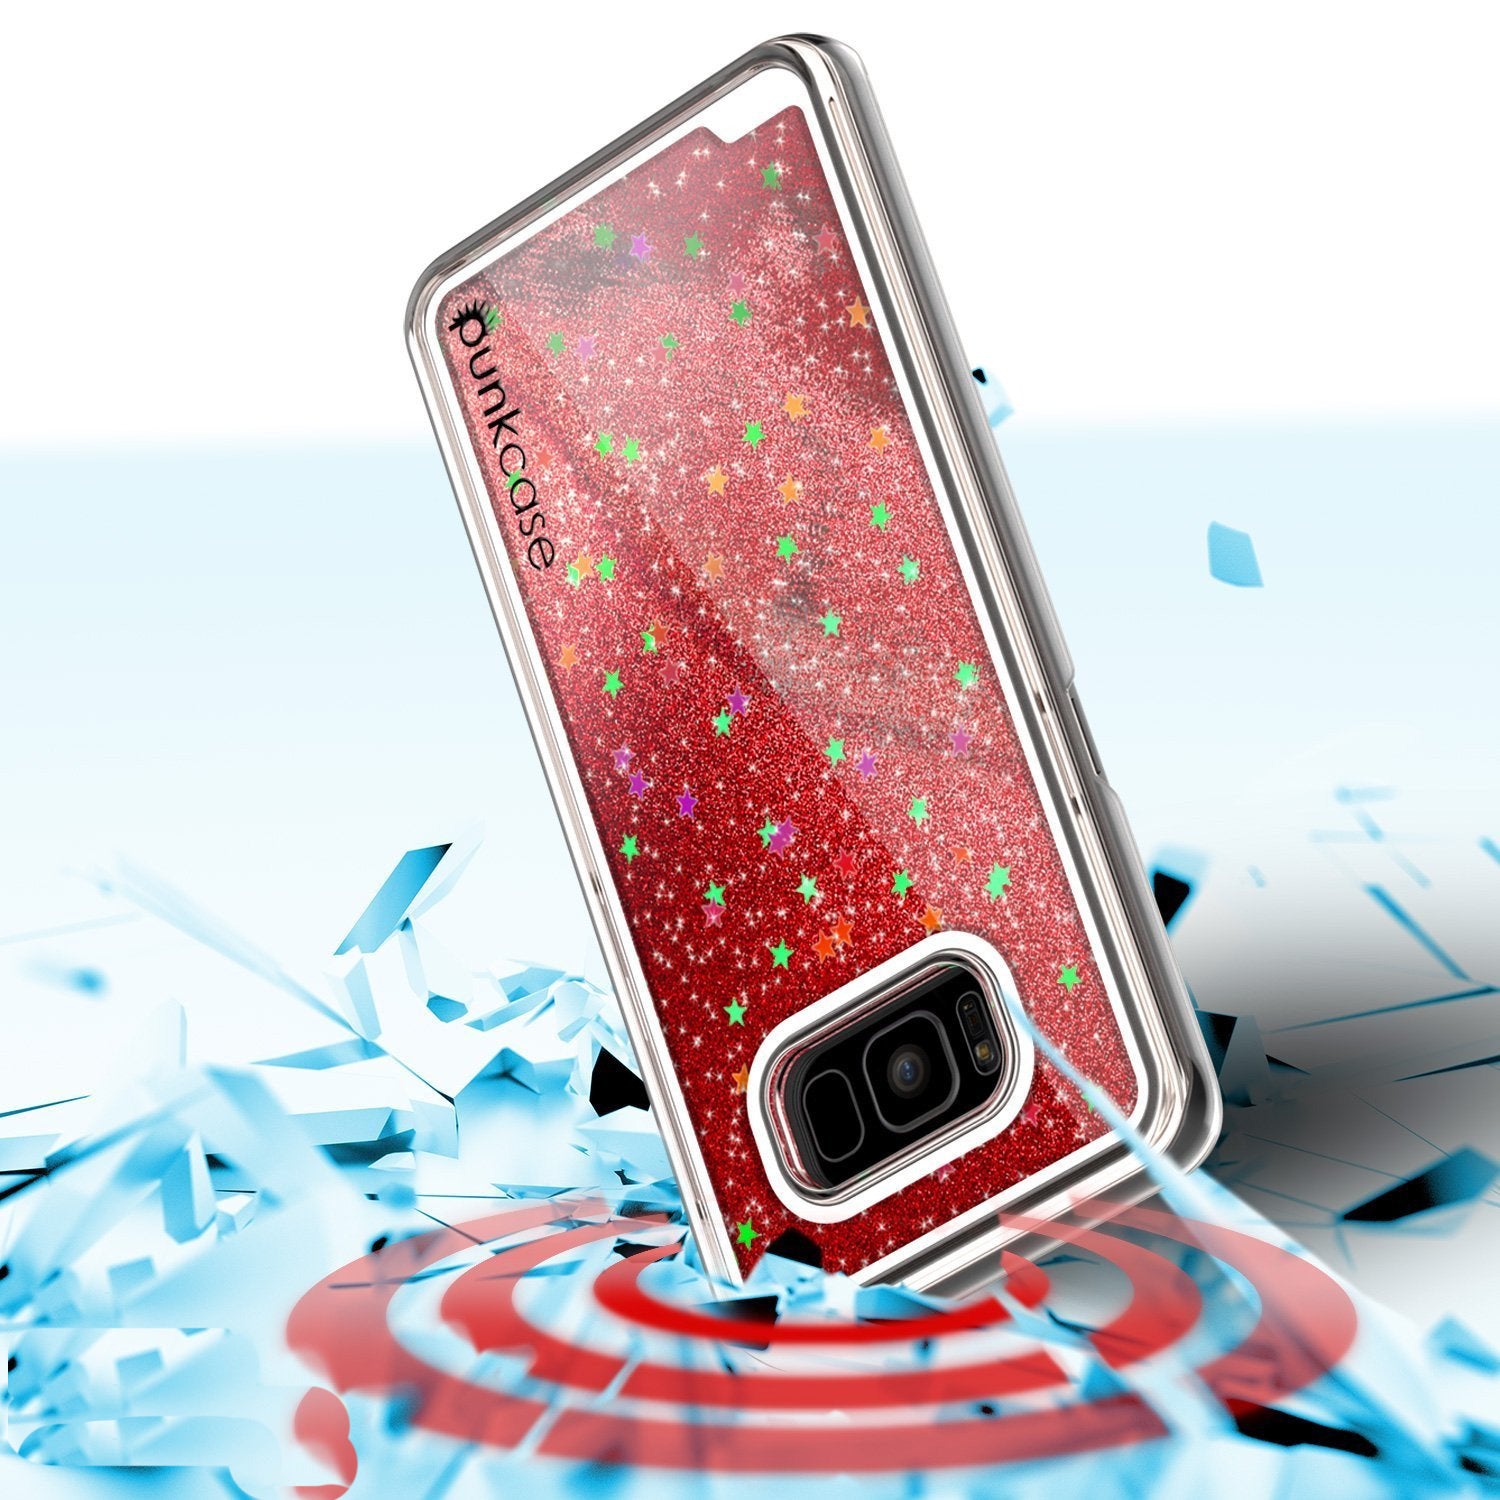 Galaxy S8 Case, Punkcase Liquid Red Series Protective Glitter Cover